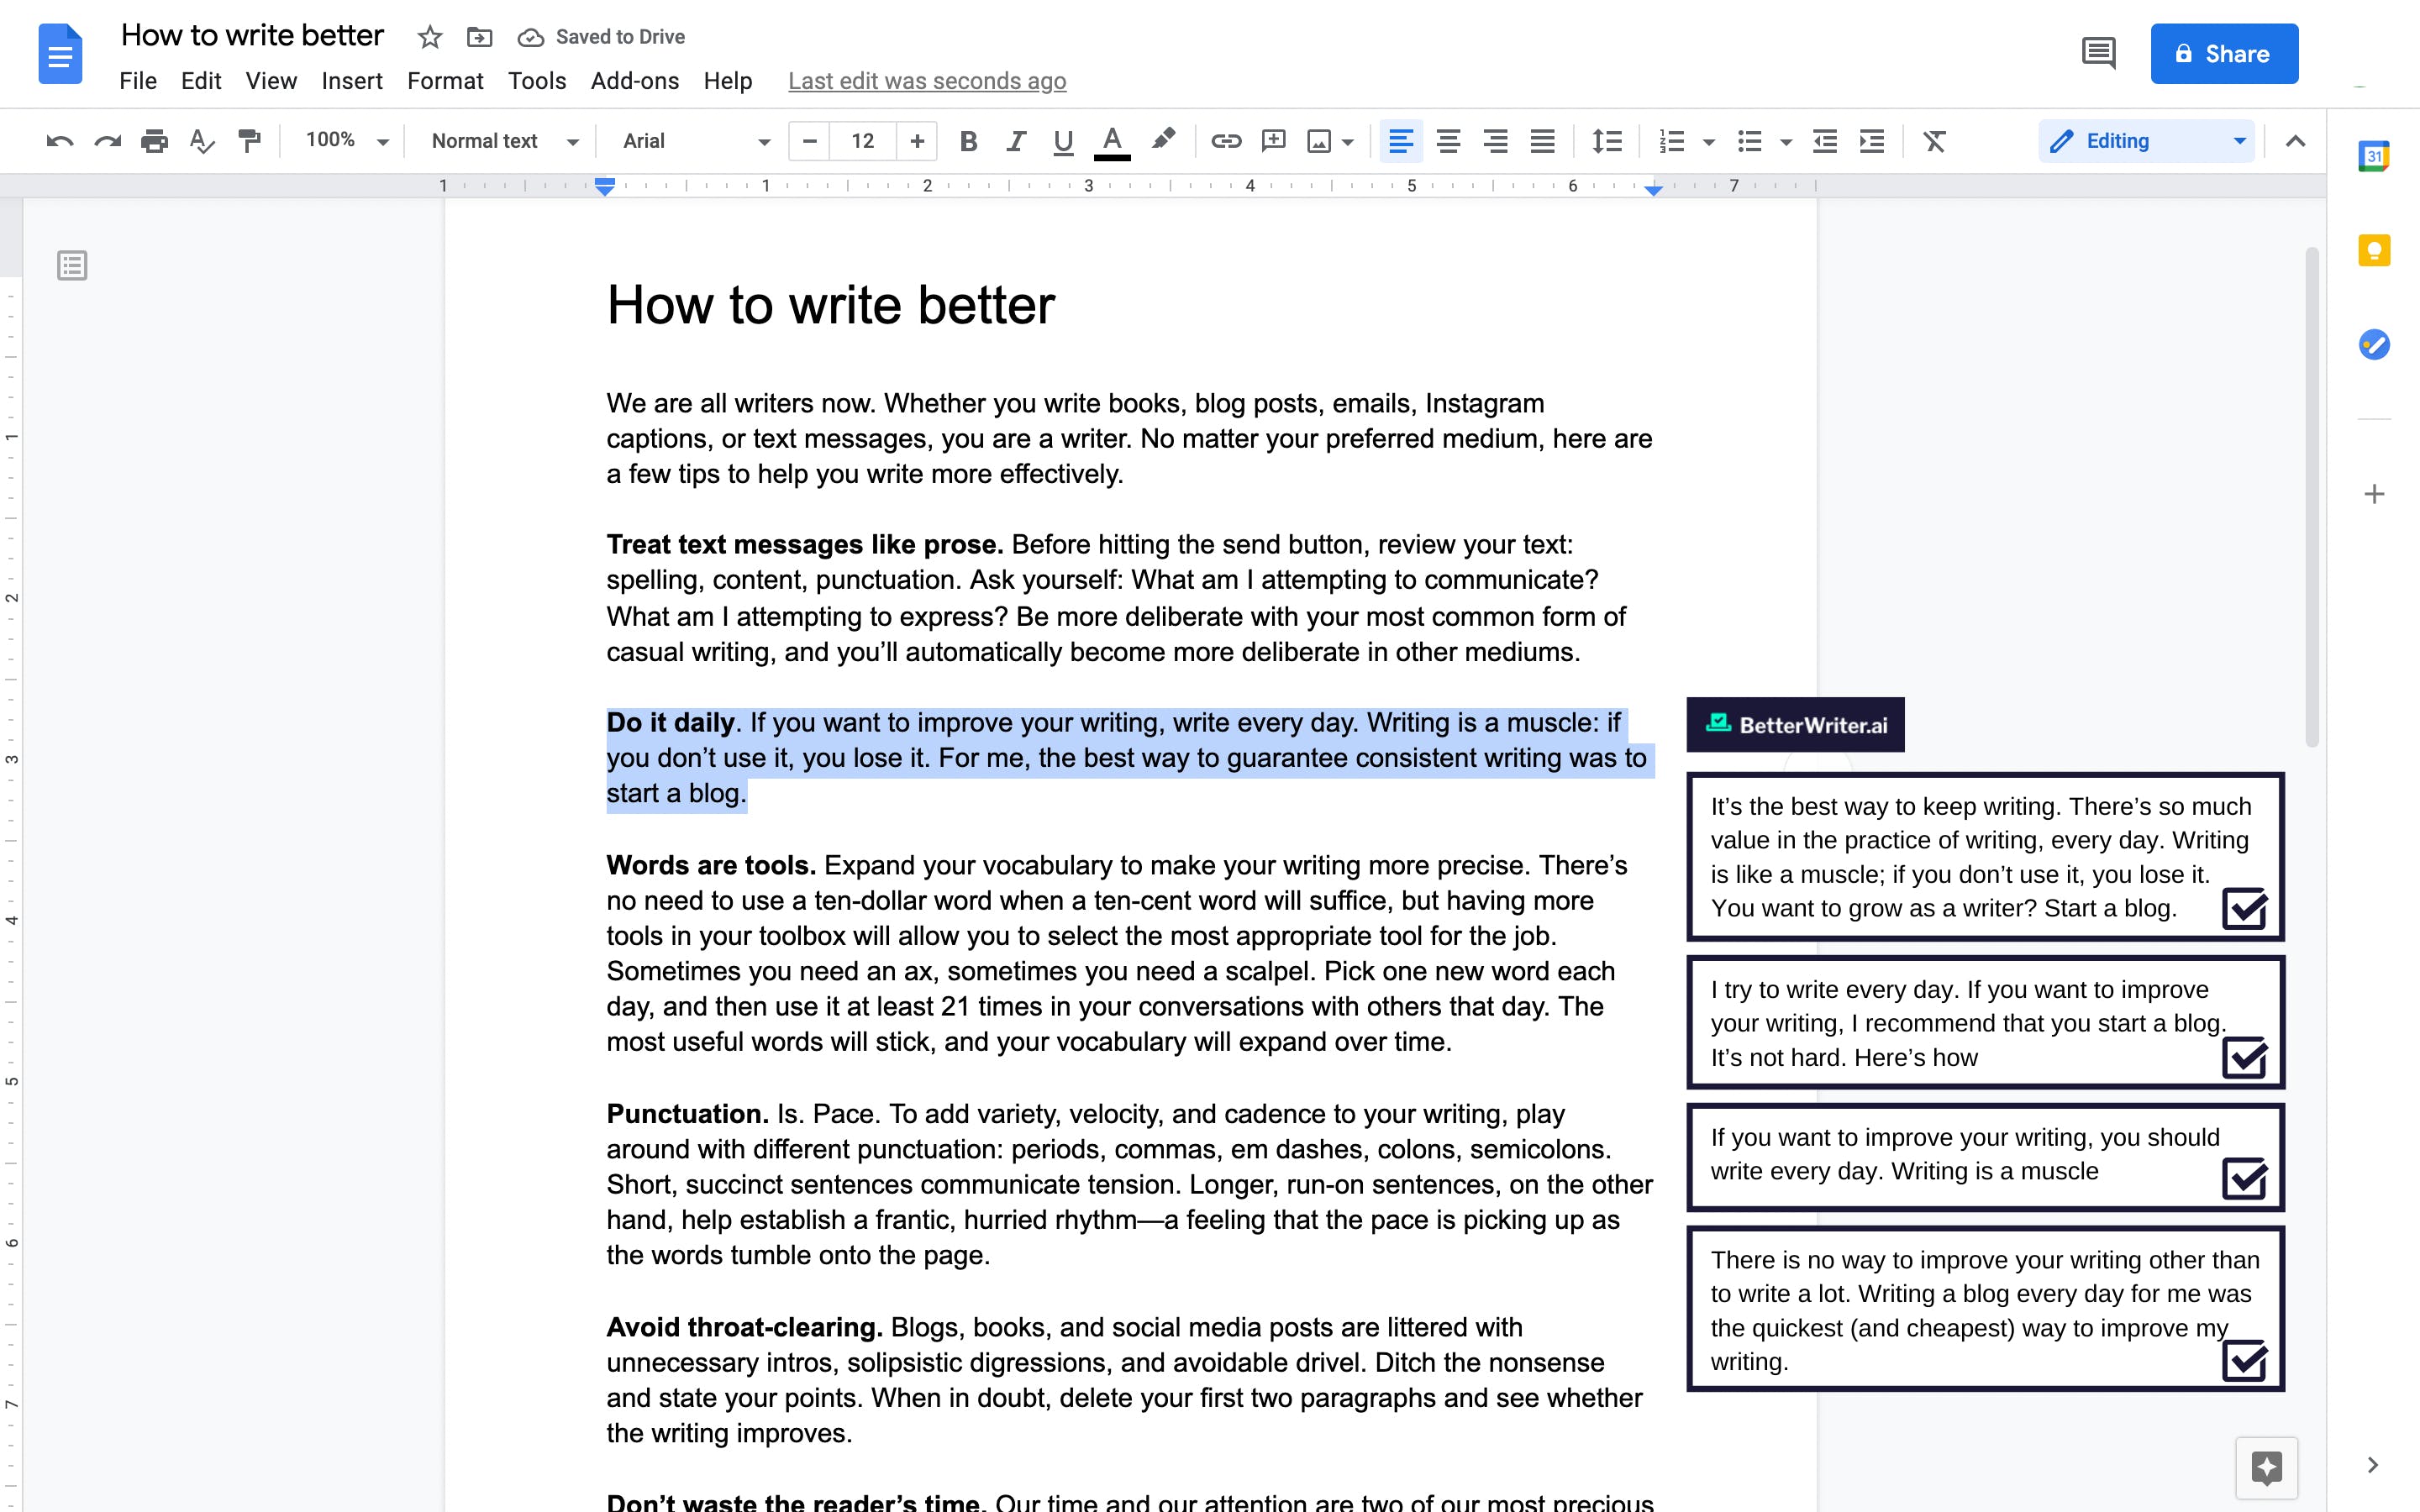 BetterWriter - Chrome extension to write better and faster with